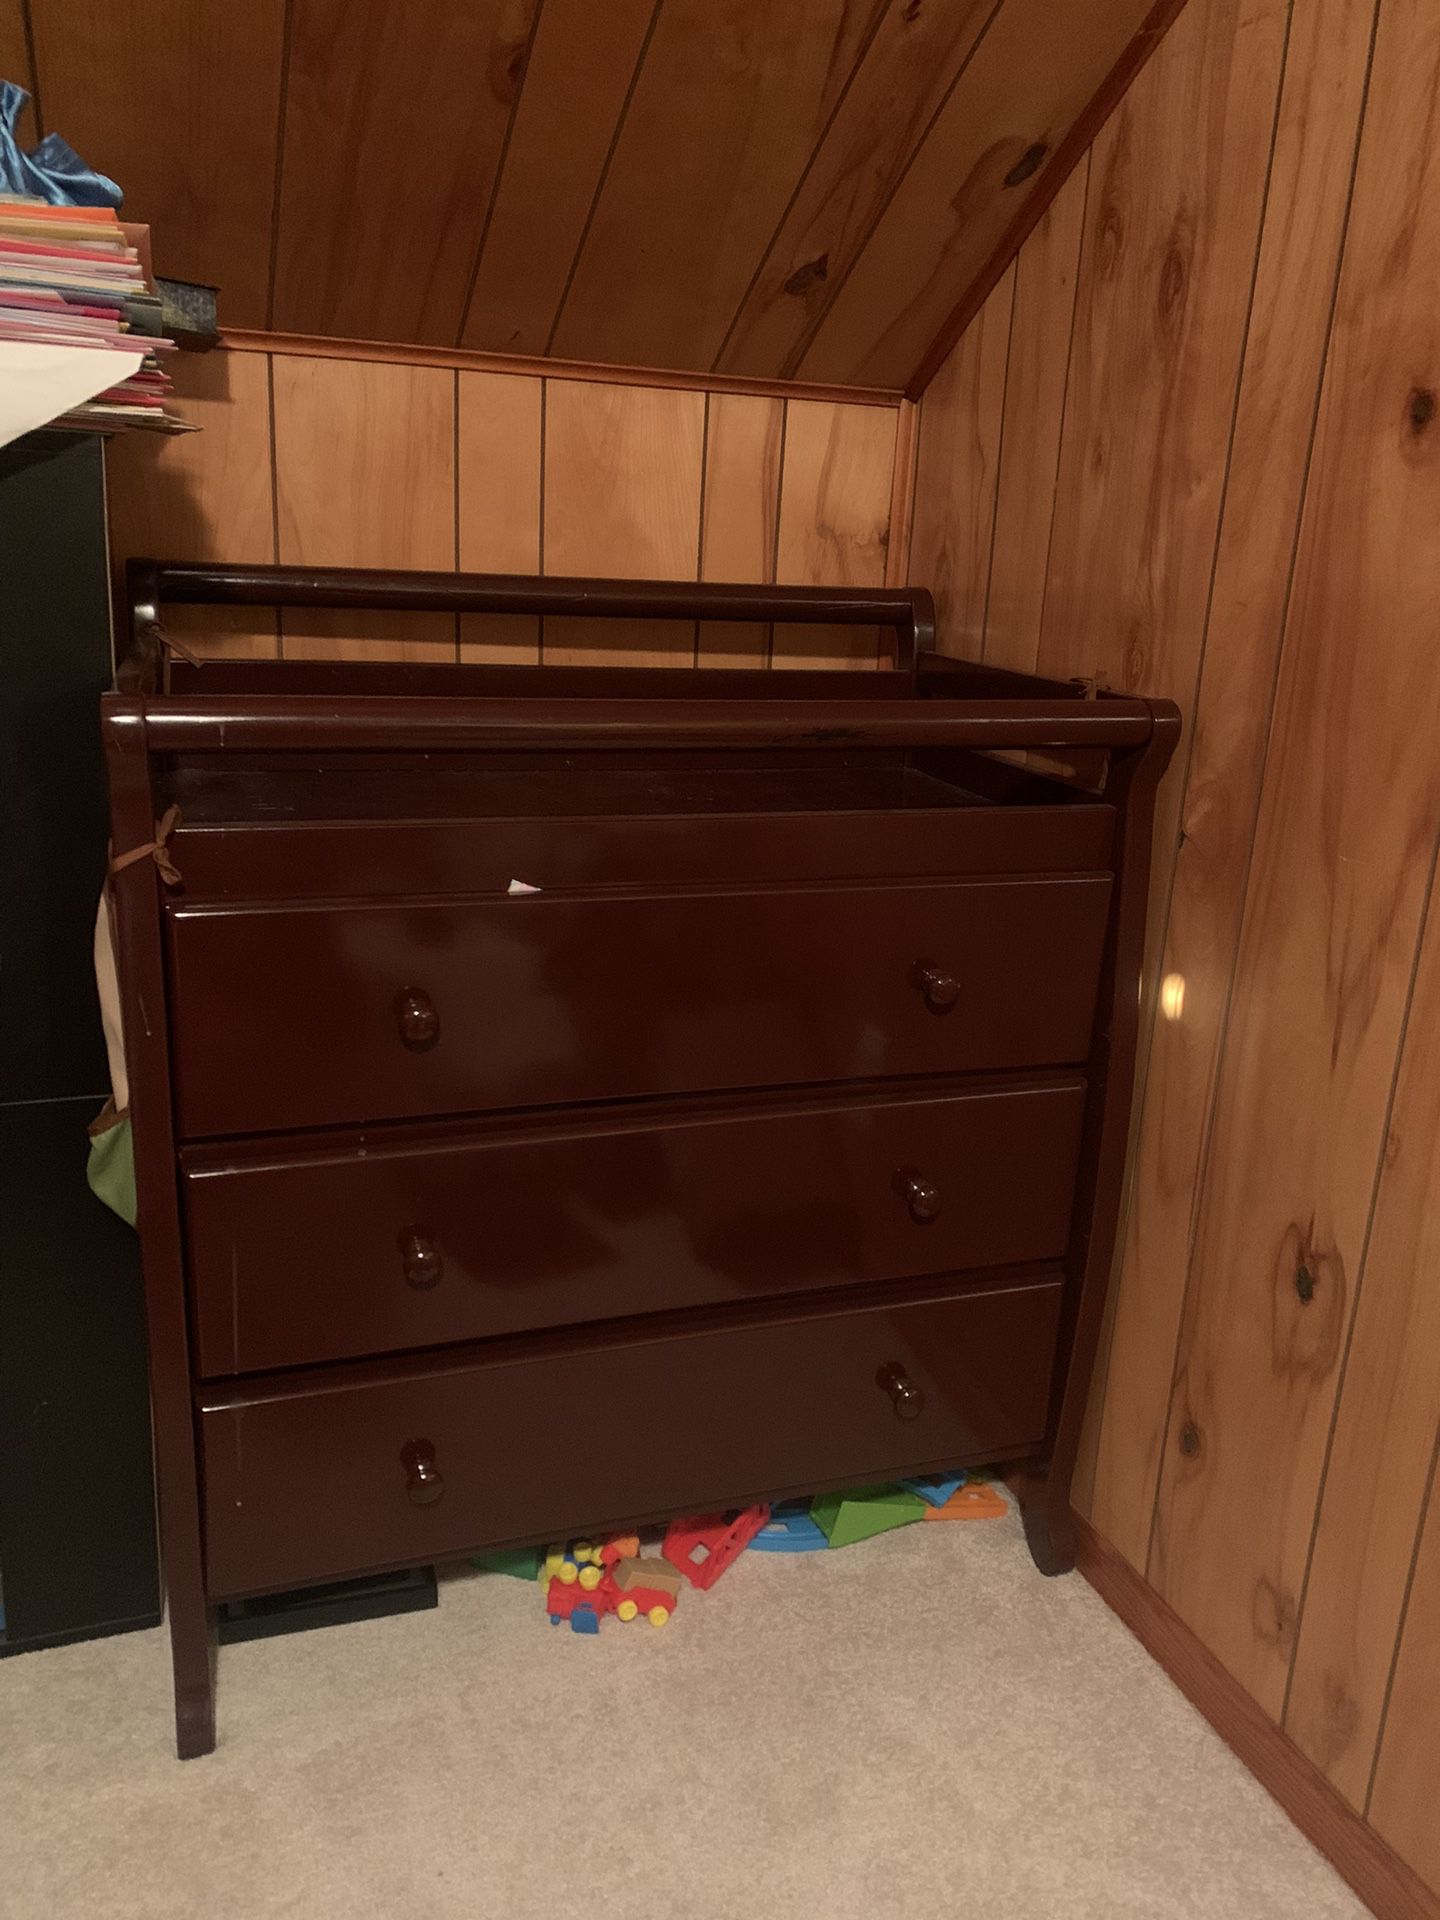 Changing Table/ Dresser 